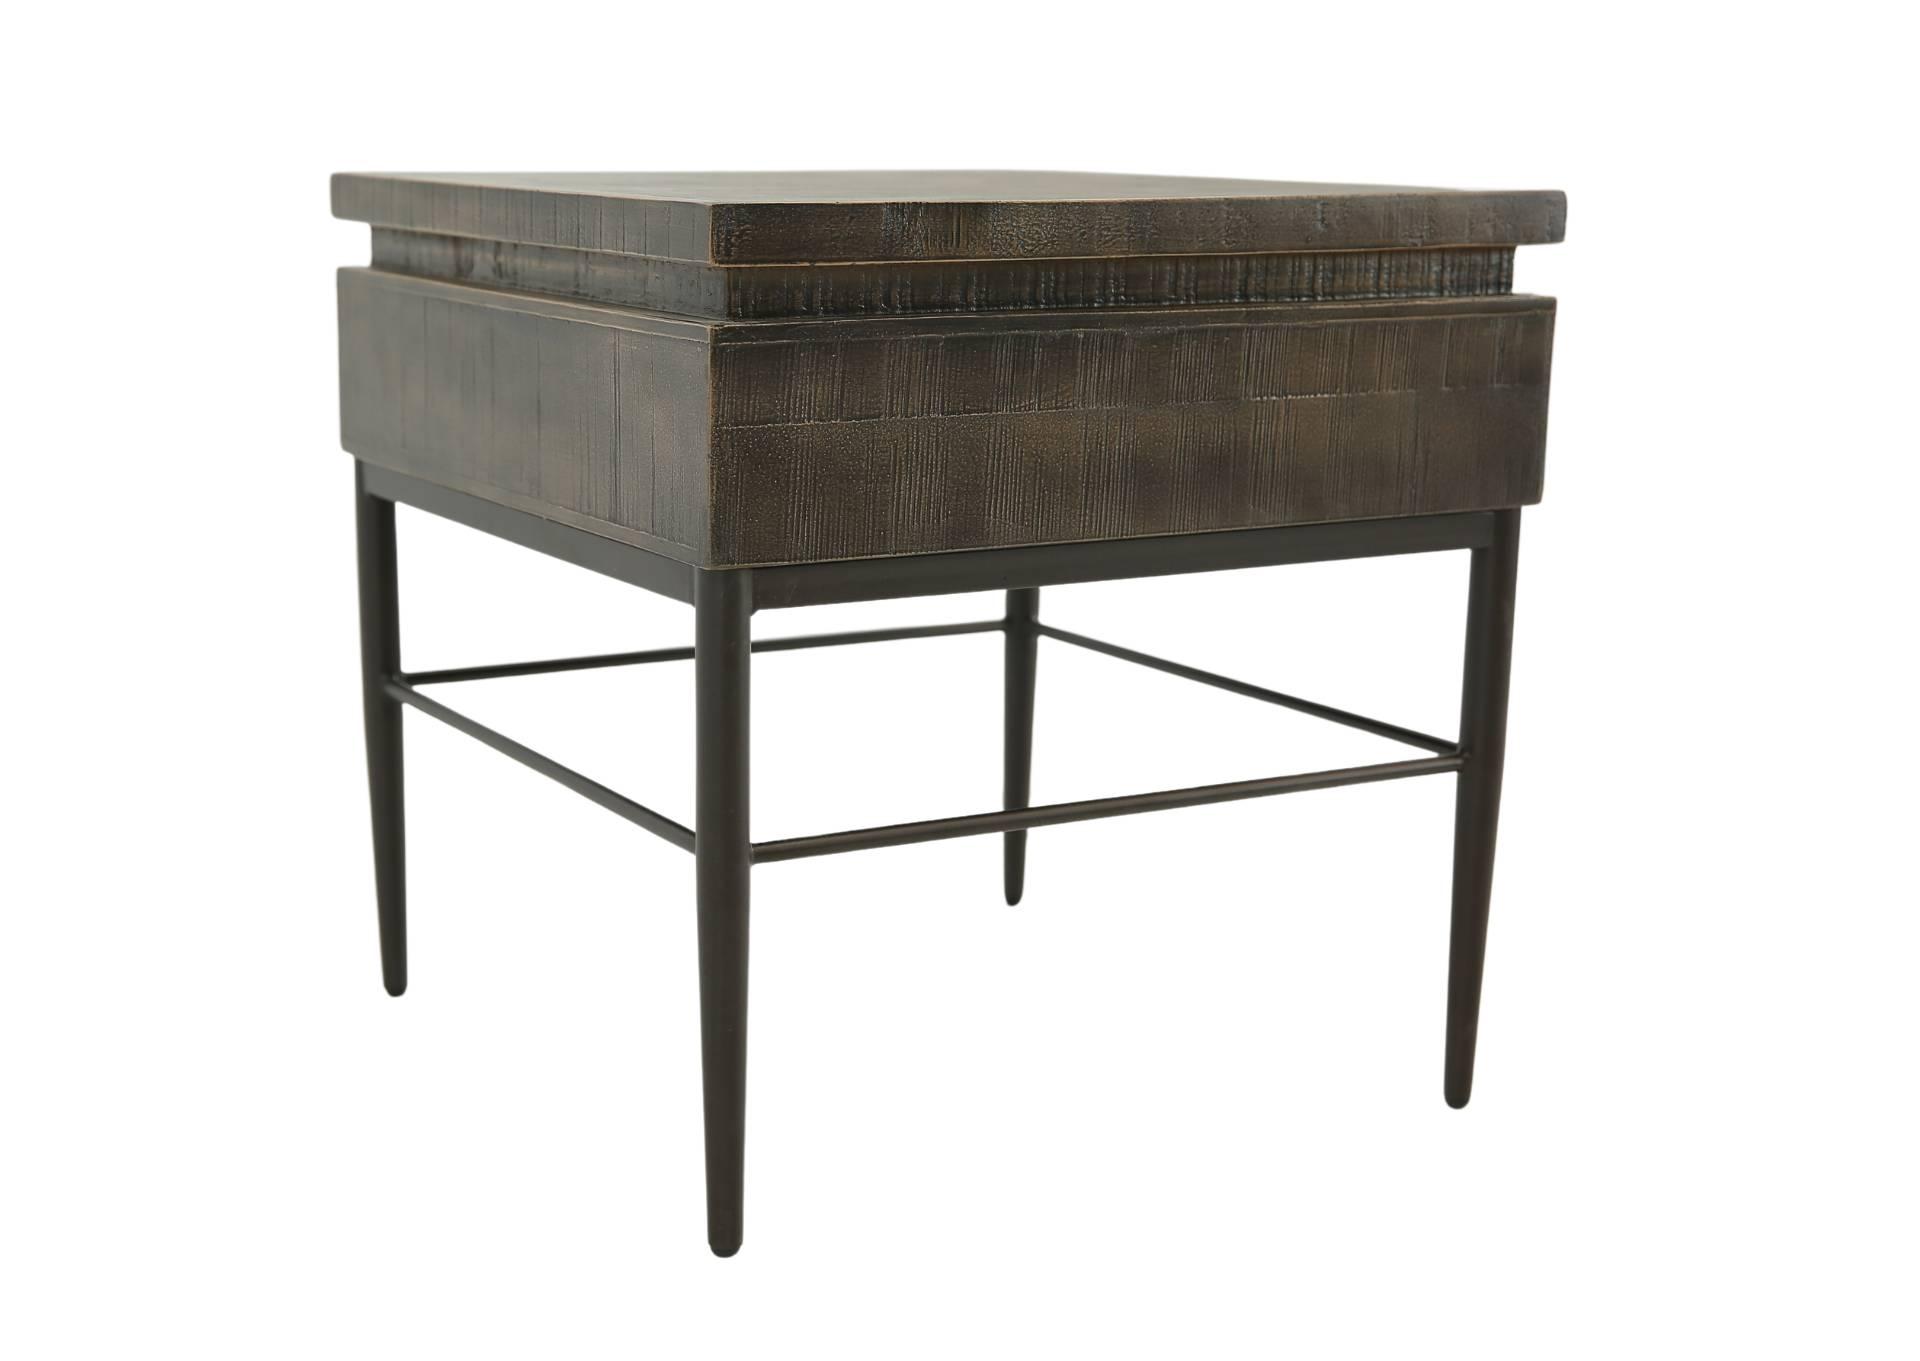 IRON & WOOD END TABLE,FURNITURE SOURCE INTERNATIONAL